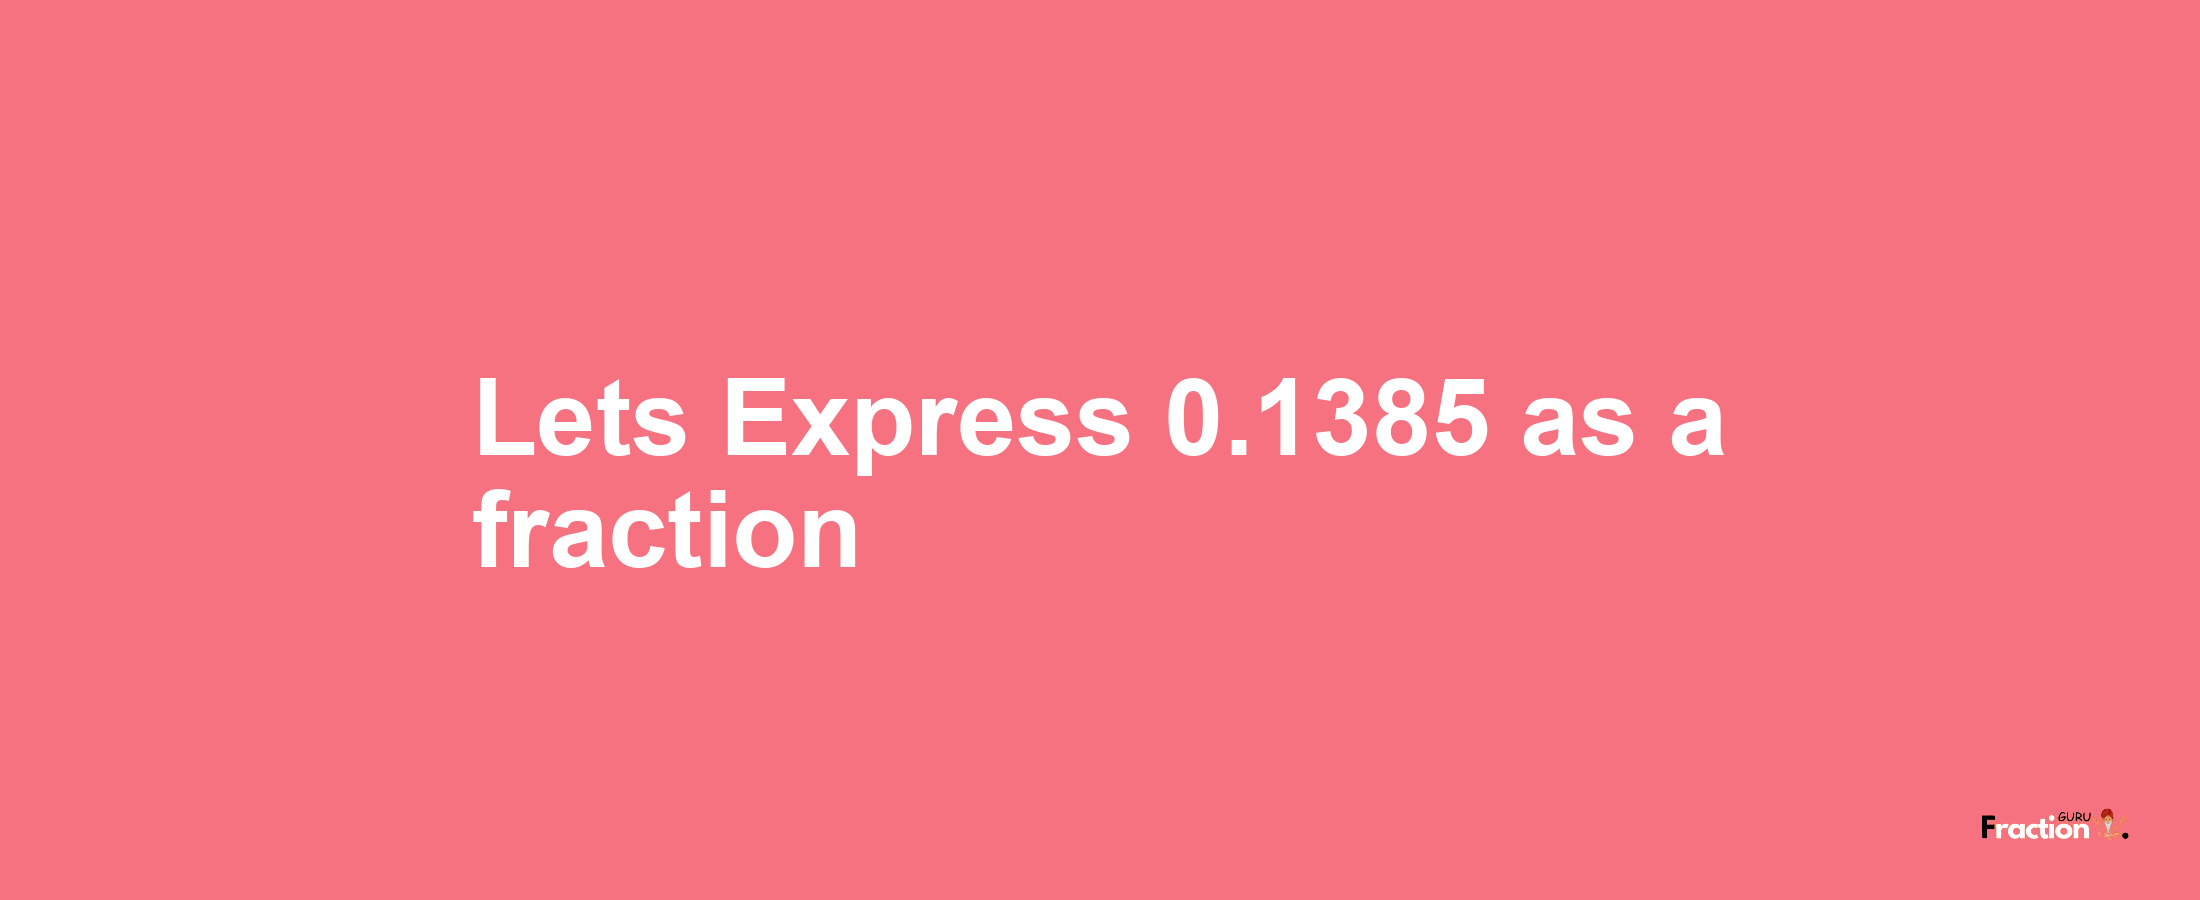 Lets Express 0.1385 as afraction